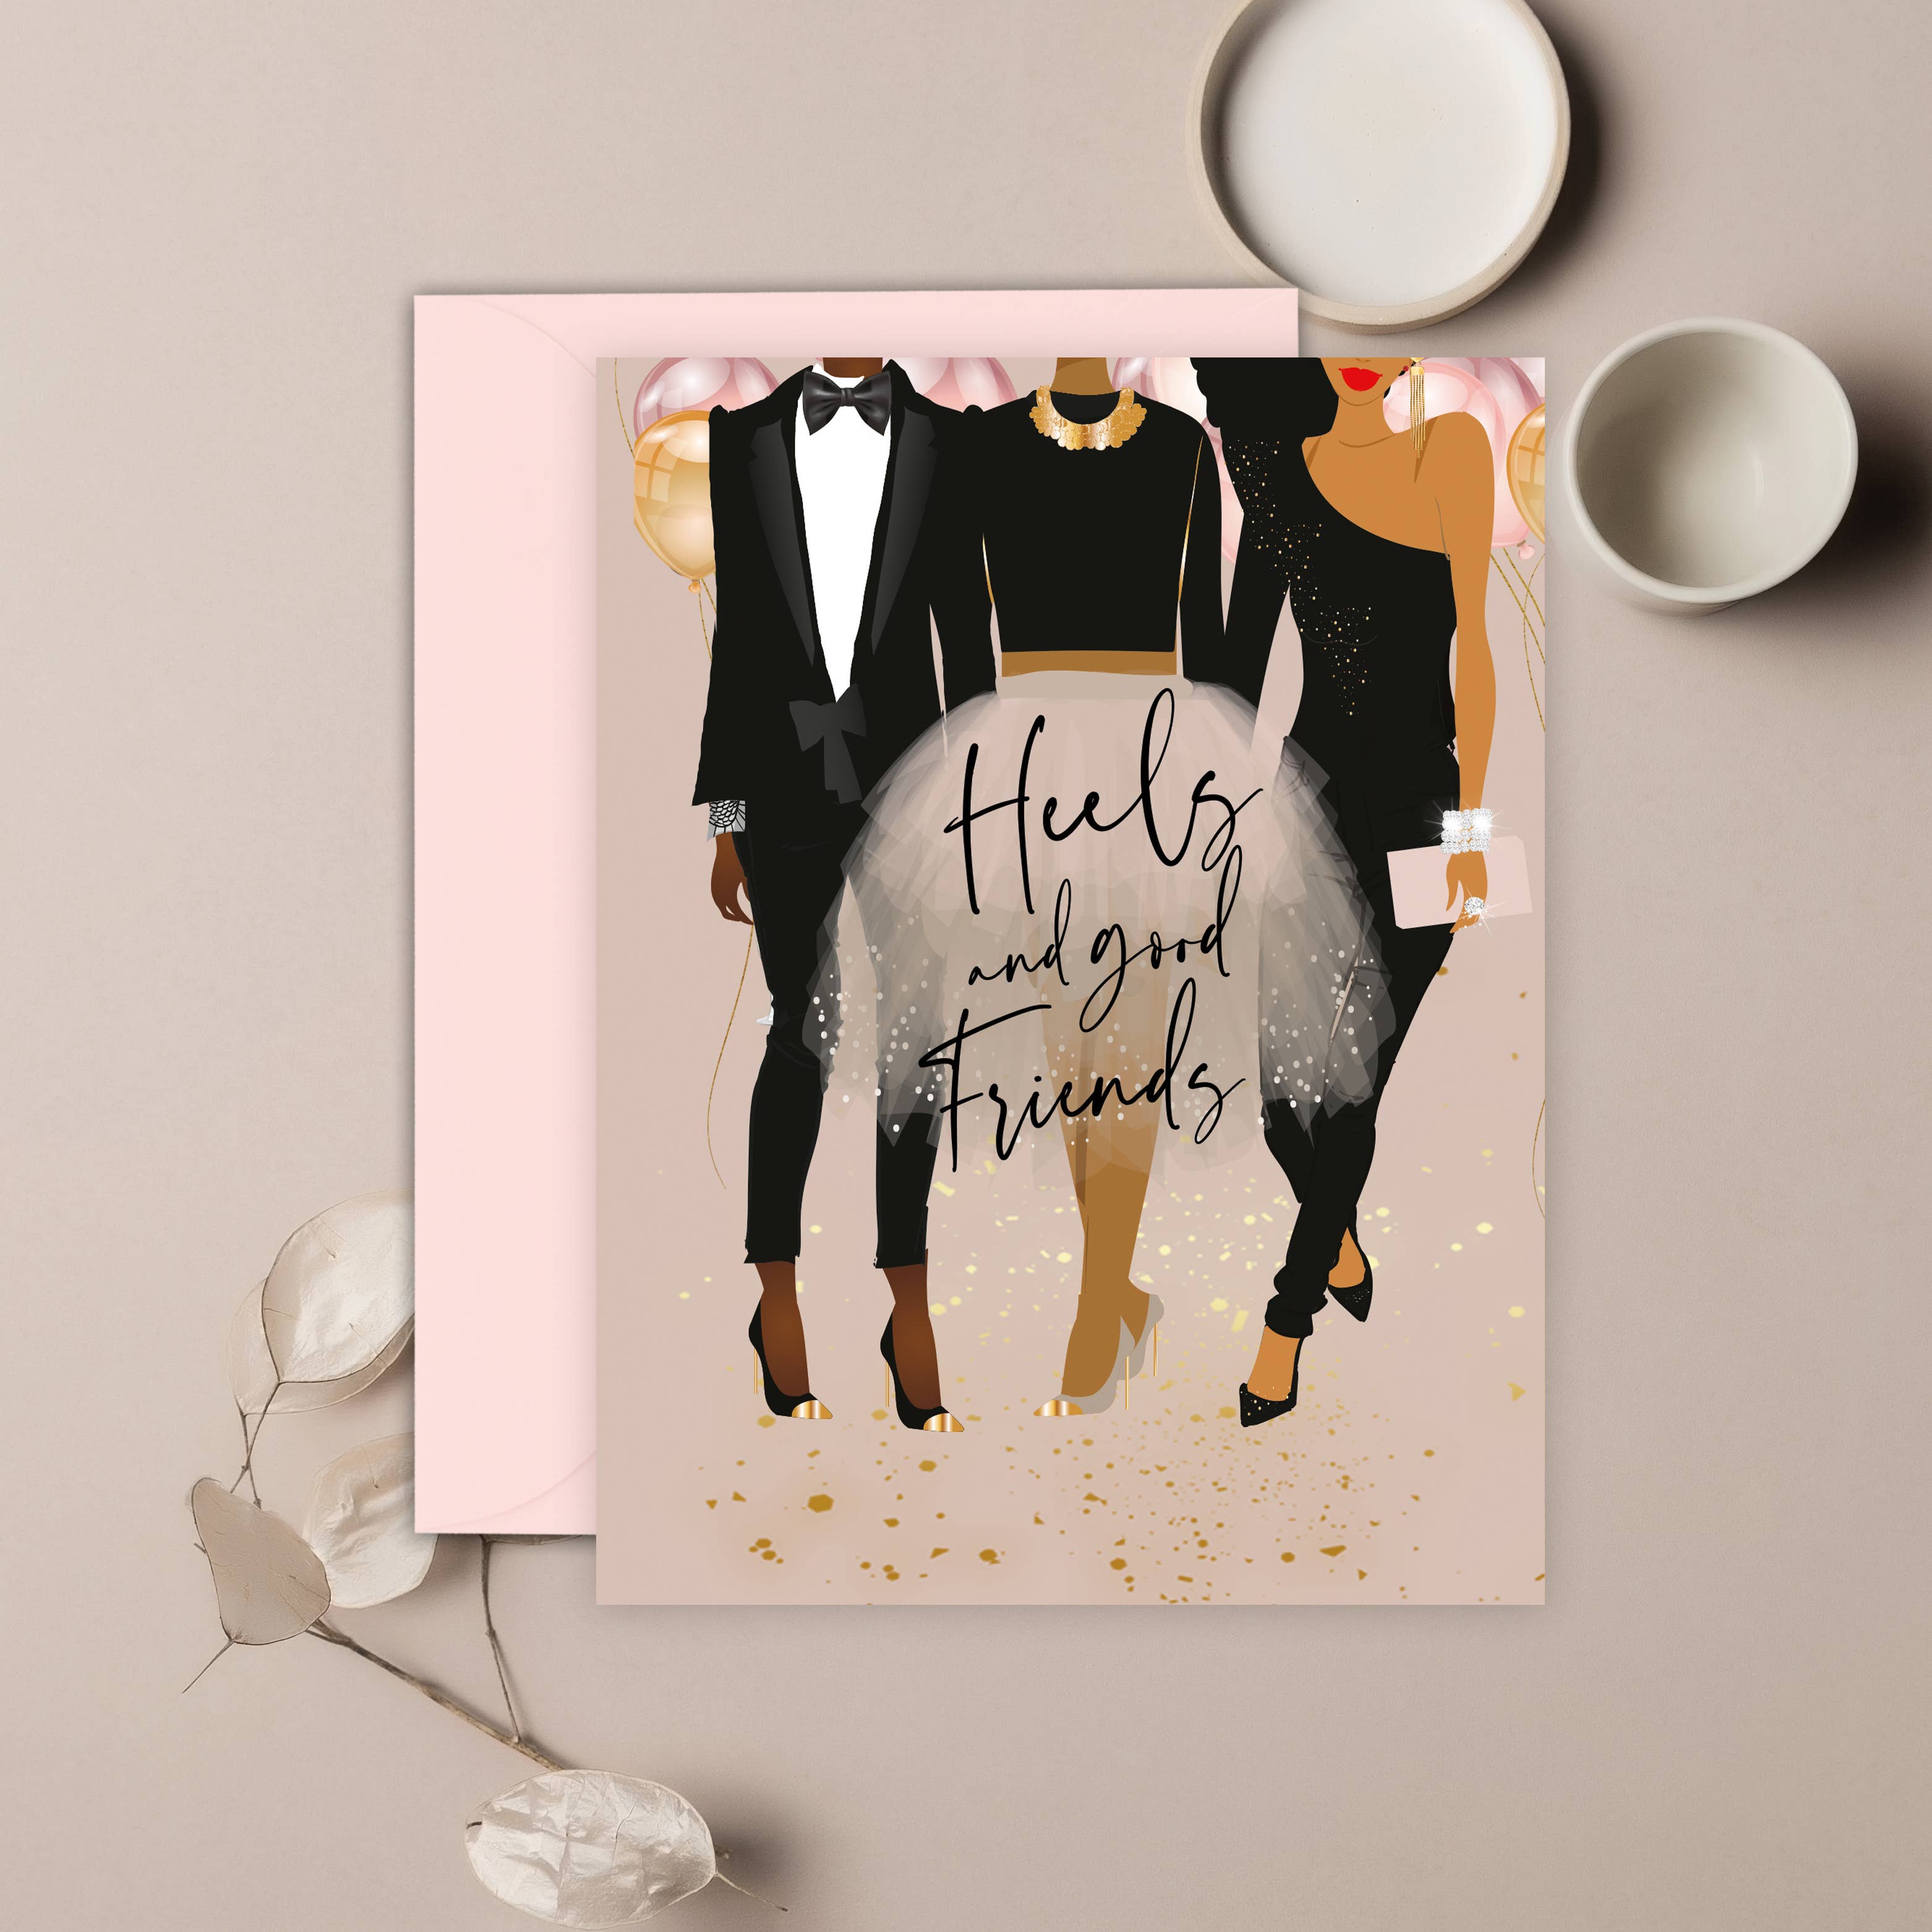 Heels and good friends greeting card